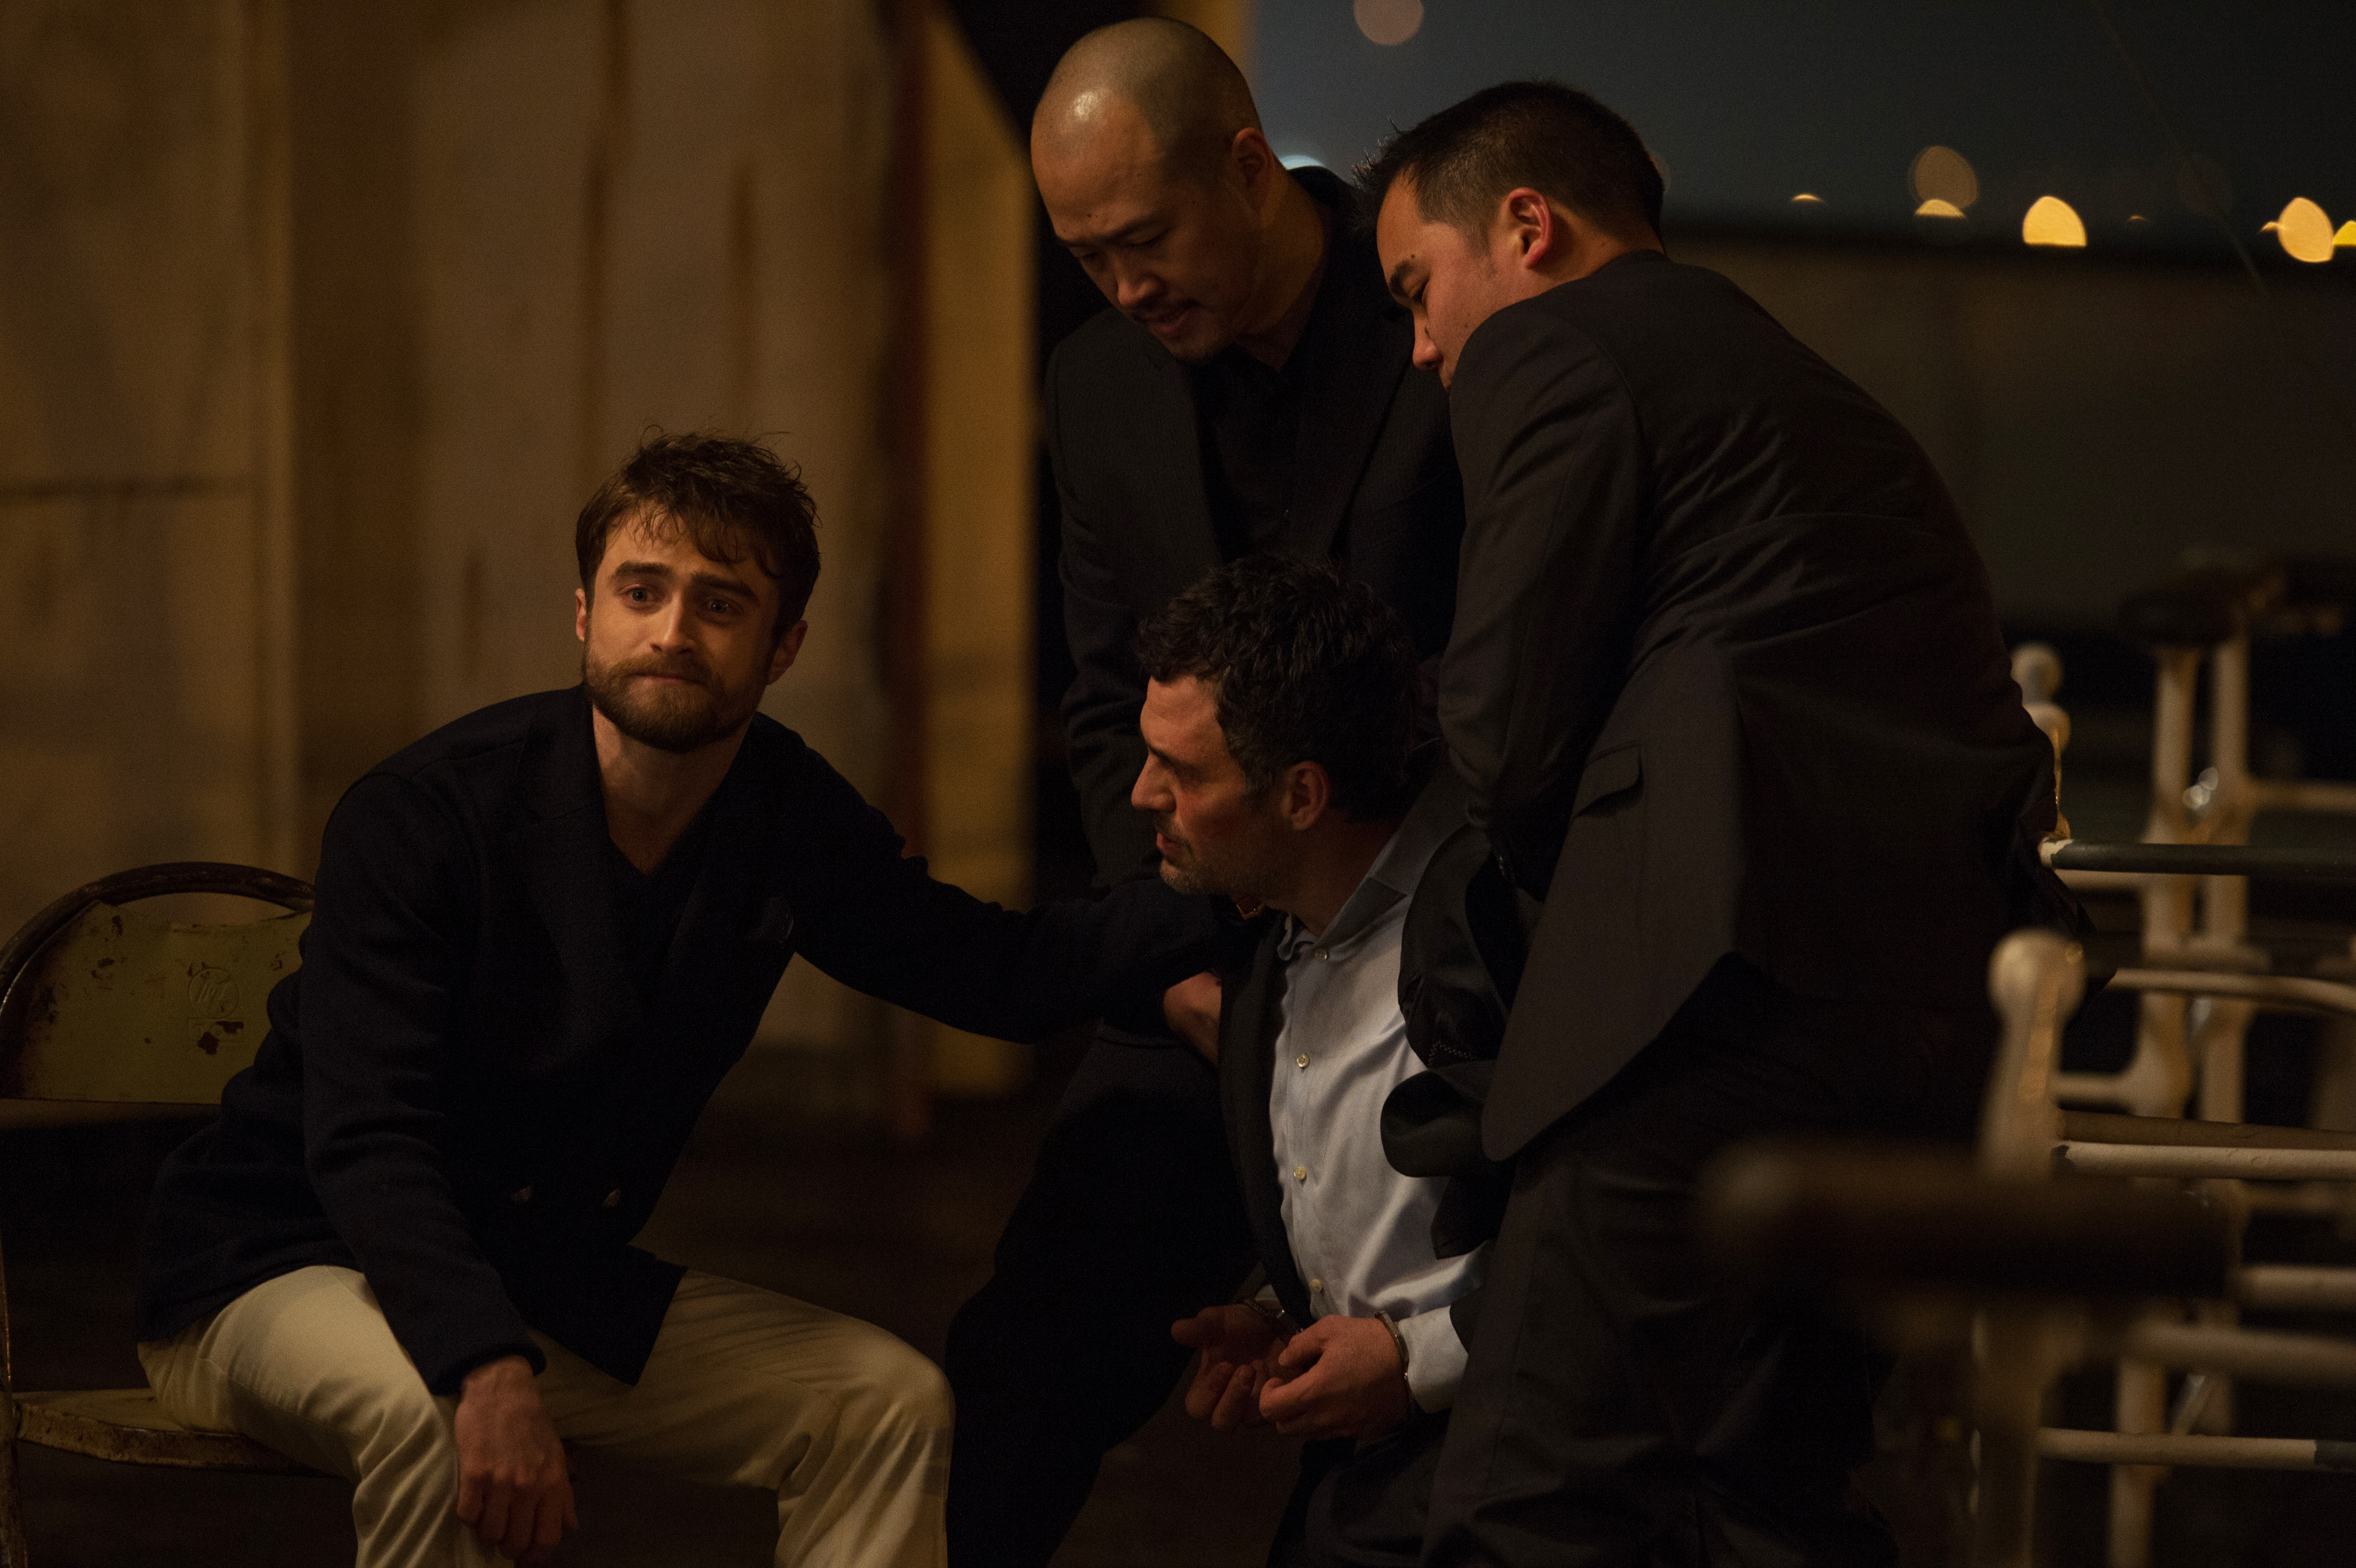 Daniel Radcliffe Walter Now You See Me Mark Ruffalo Dylan Rhodes Now You See Me 2 4928x3280